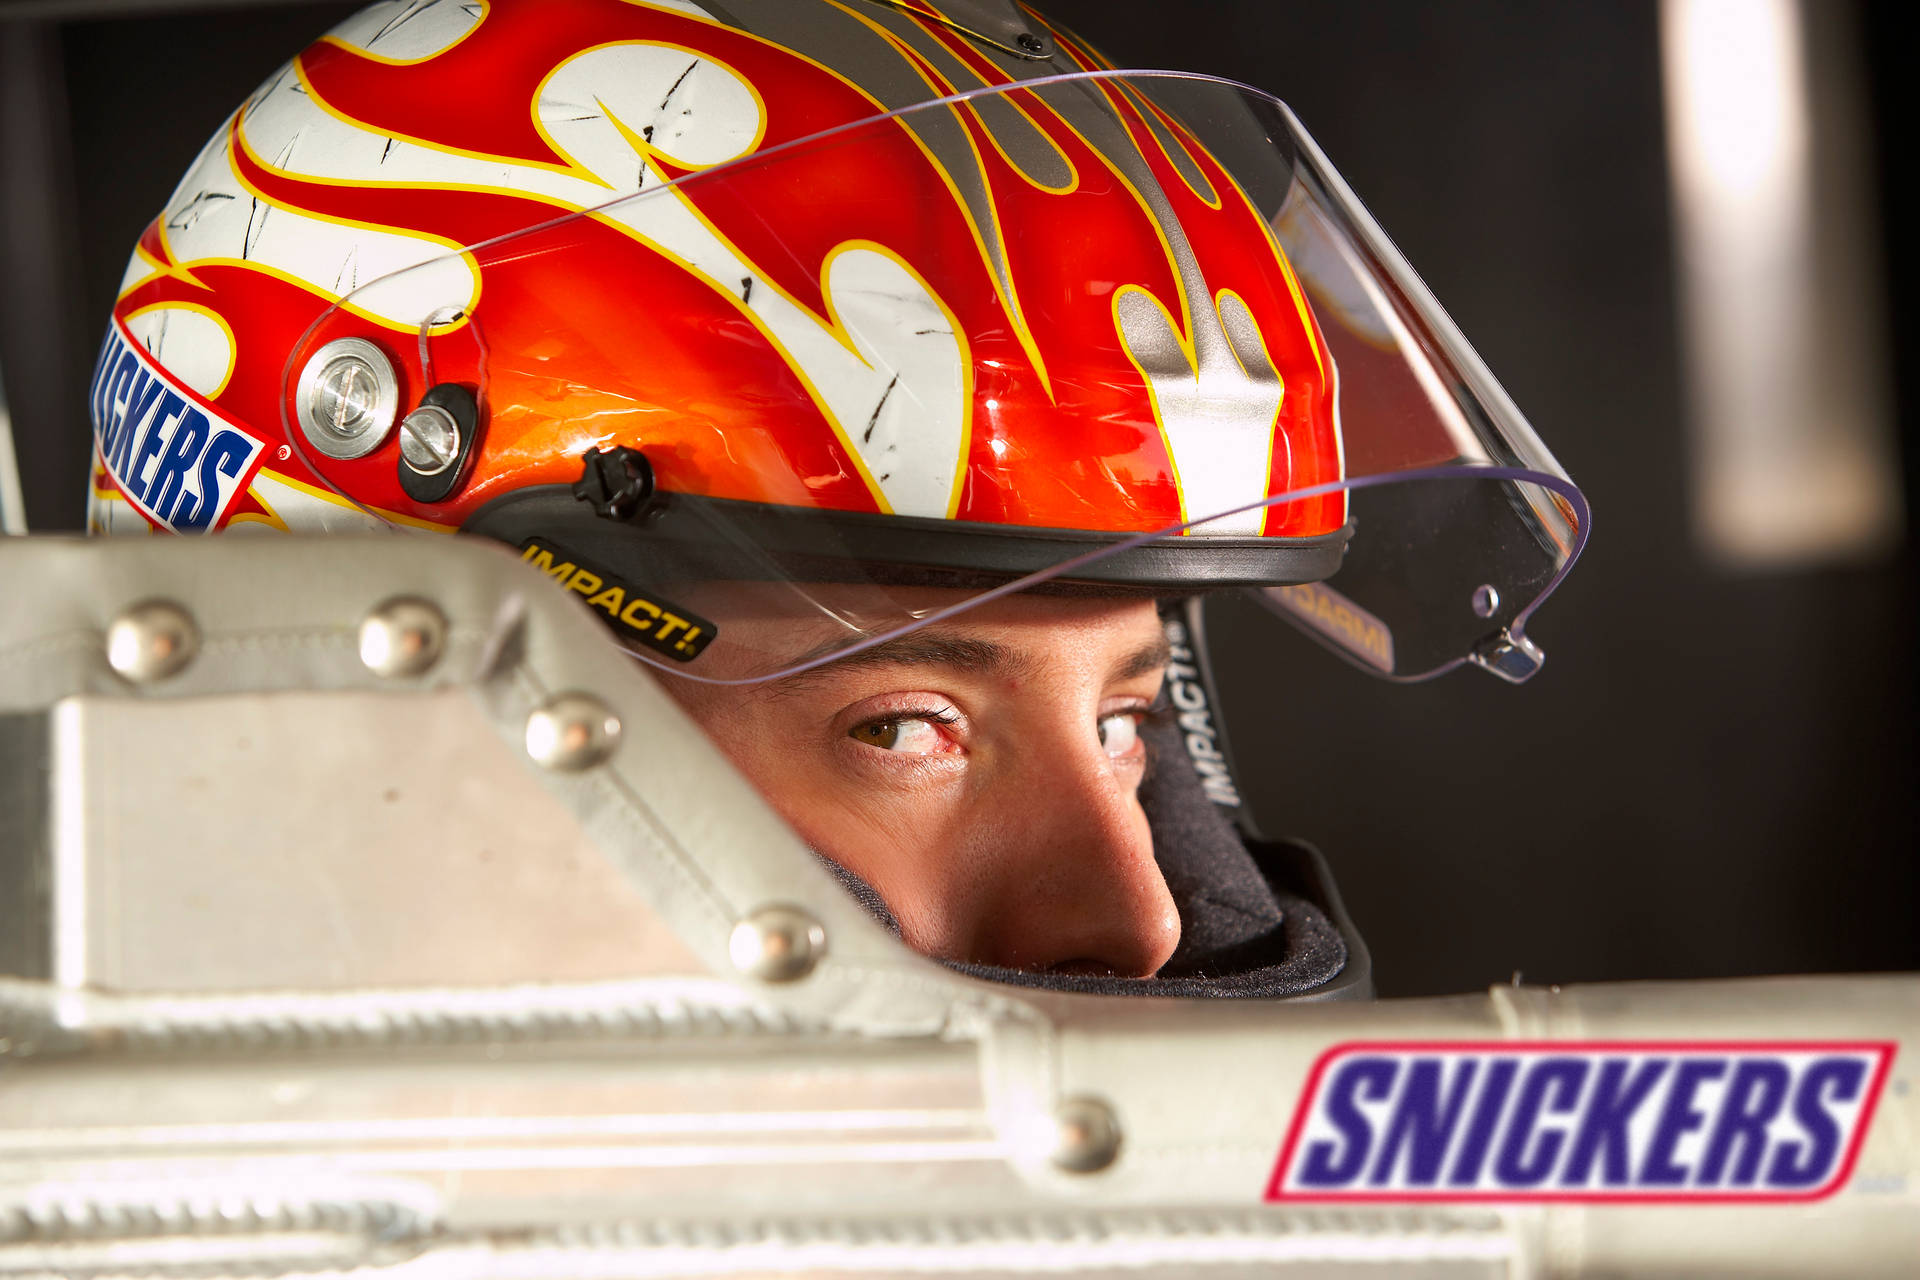 Kyle Busch posed with the Snickers logo on his racing gear. Wallpaper